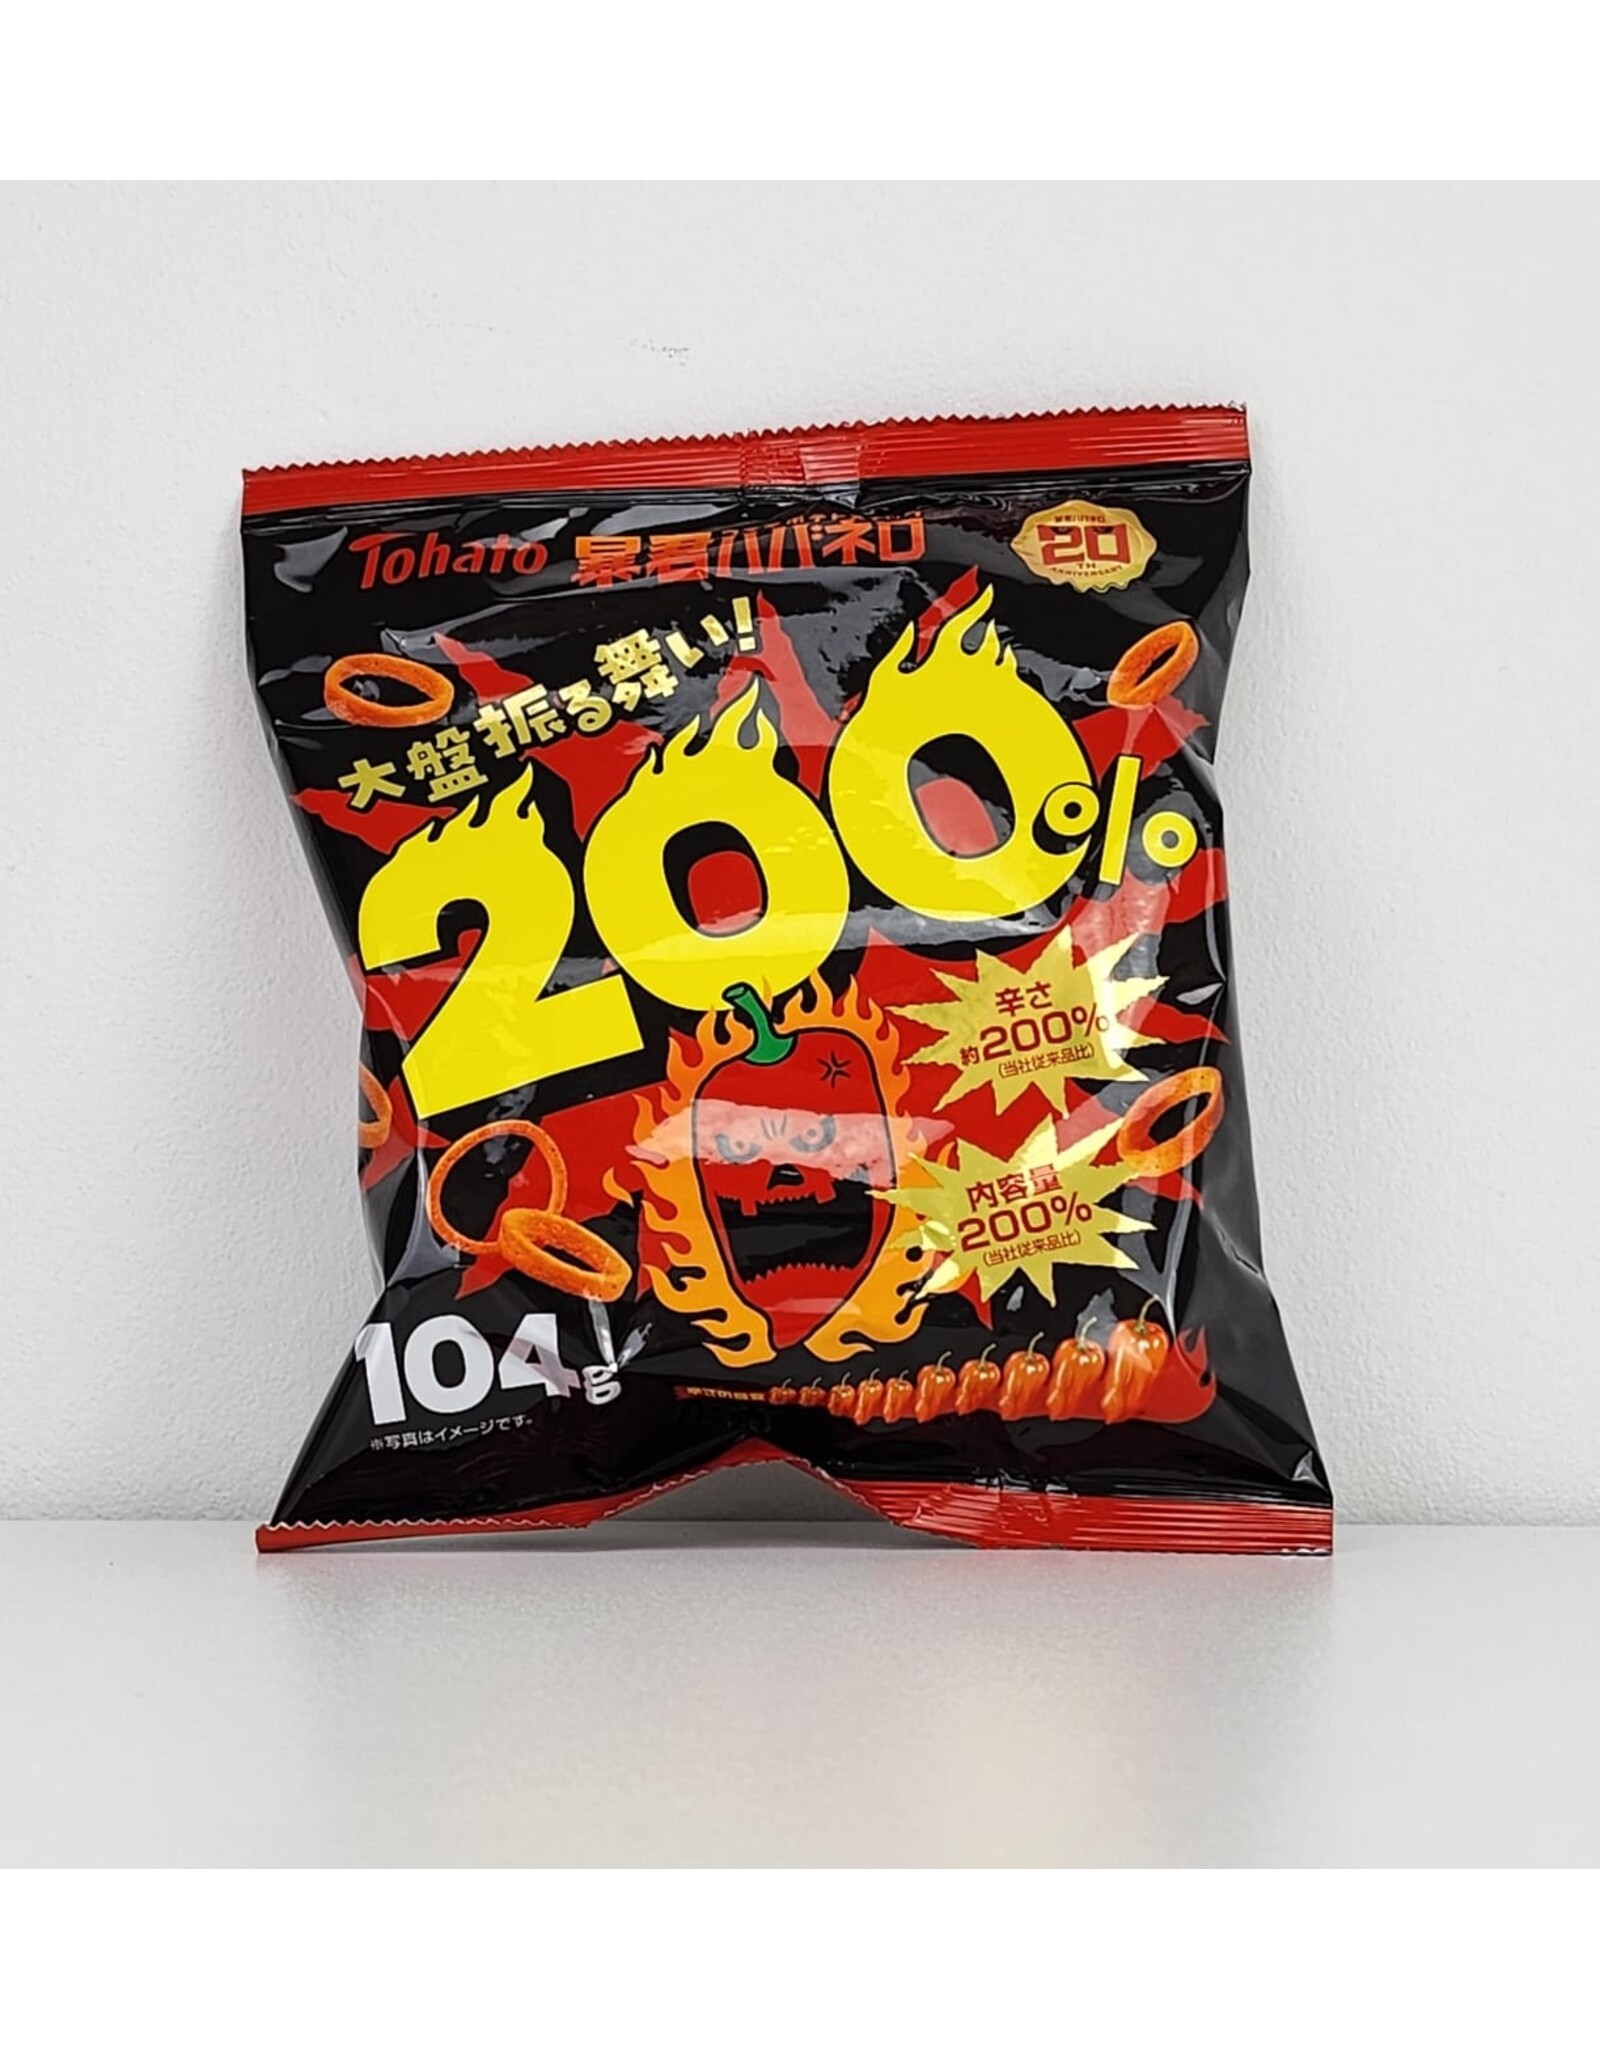 Bokun Habanero Flavored Spicy Rings 200% Mad Spice - 104g